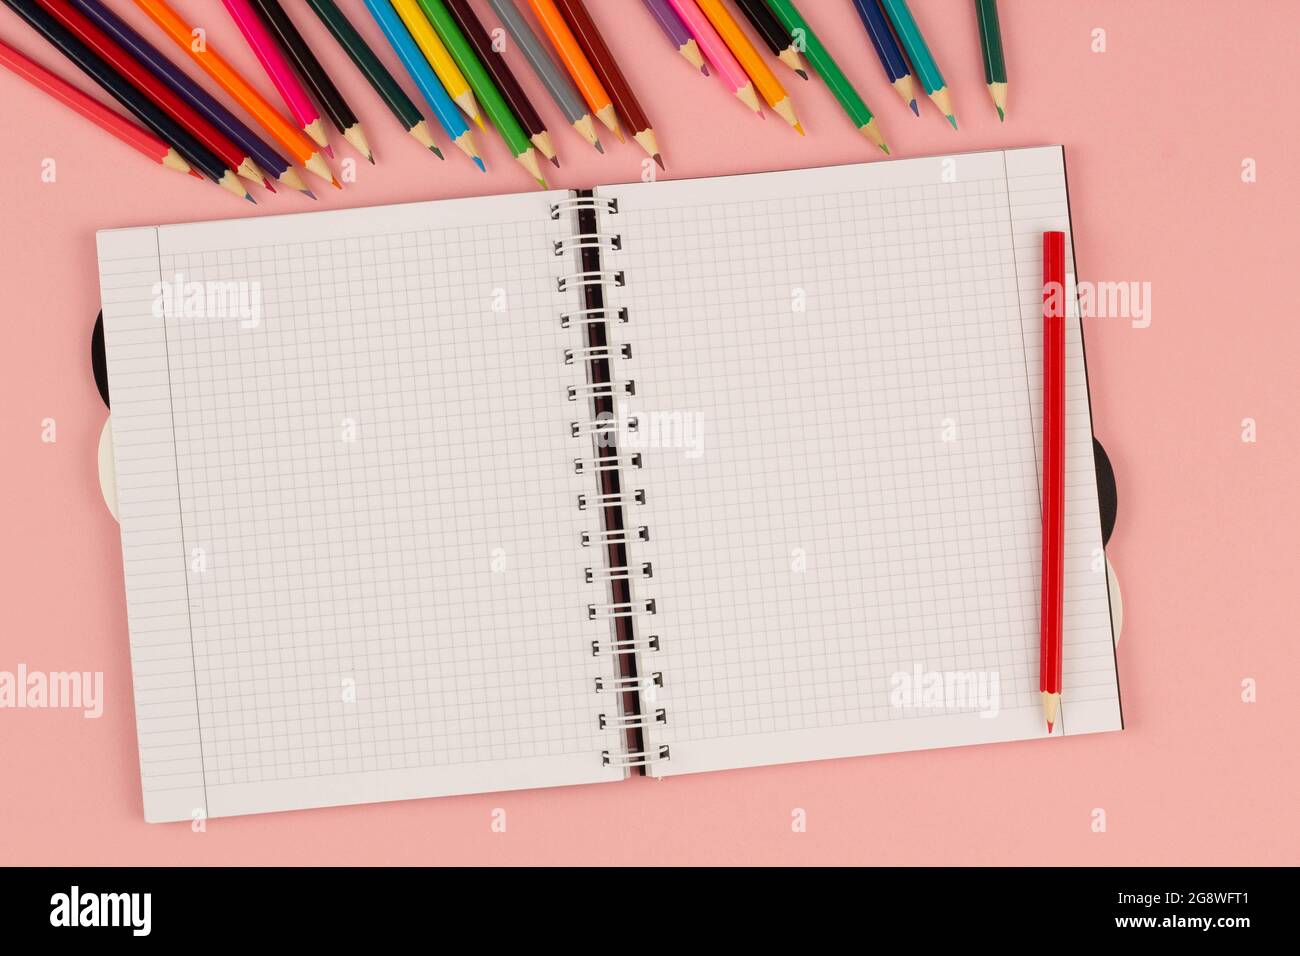 School supplies of pink and white colors on a pink background